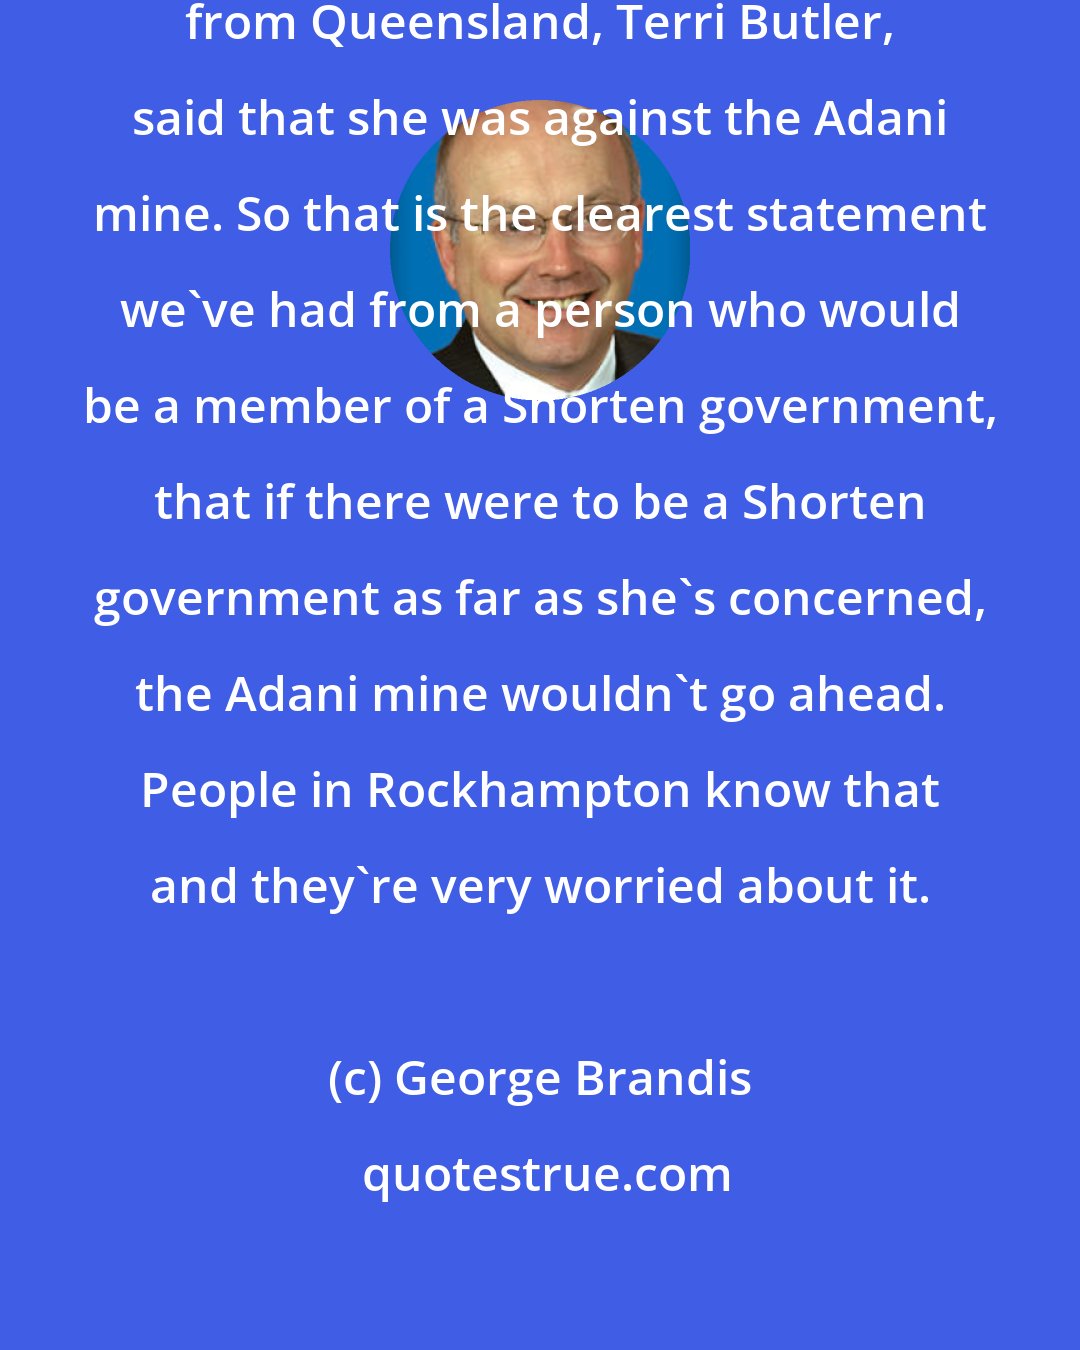 George Brandis: One of the senior Labor frontbenchers from Queensland, Terri Butler, said that she was against the Adani mine. So that is the clearest statement we've had from a person who would be a member of a Shorten government, that if there were to be a Shorten government as far as she's concerned, the Adani mine wouldn't go ahead. People in Rockhampton know that and they're very worried about it.